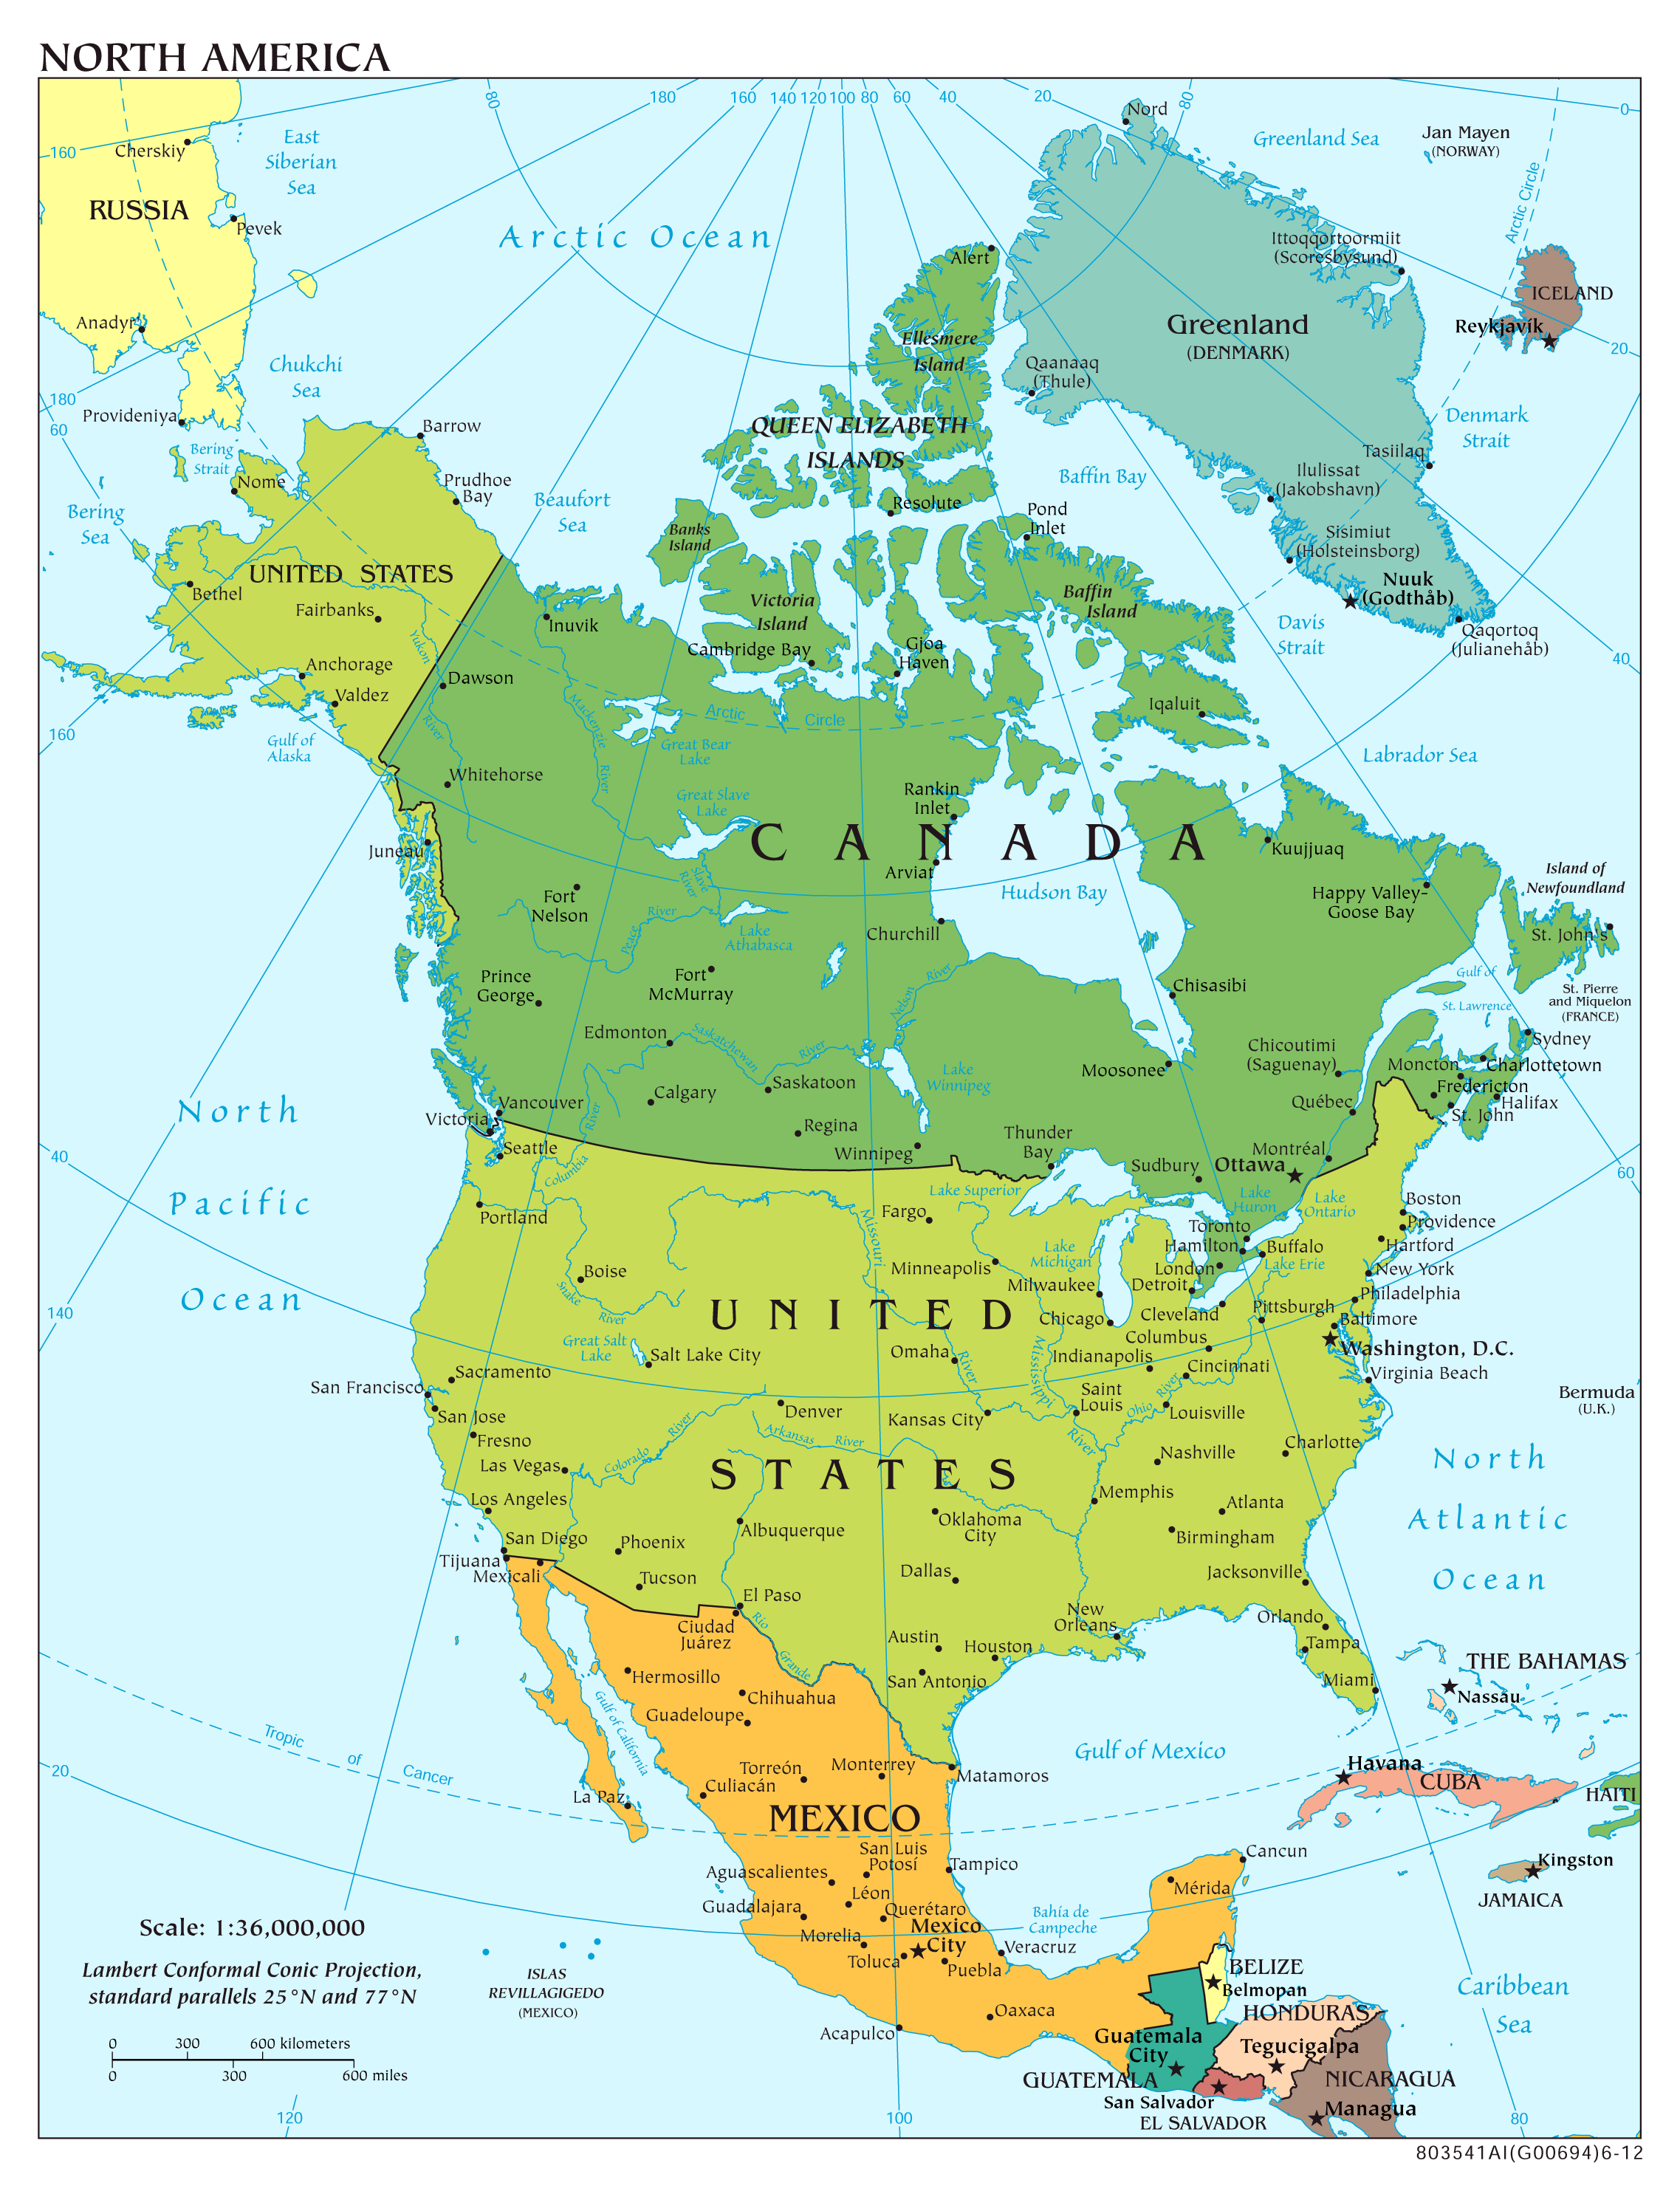 large-political-map-of-north-america-with-relief-and-cities-2000